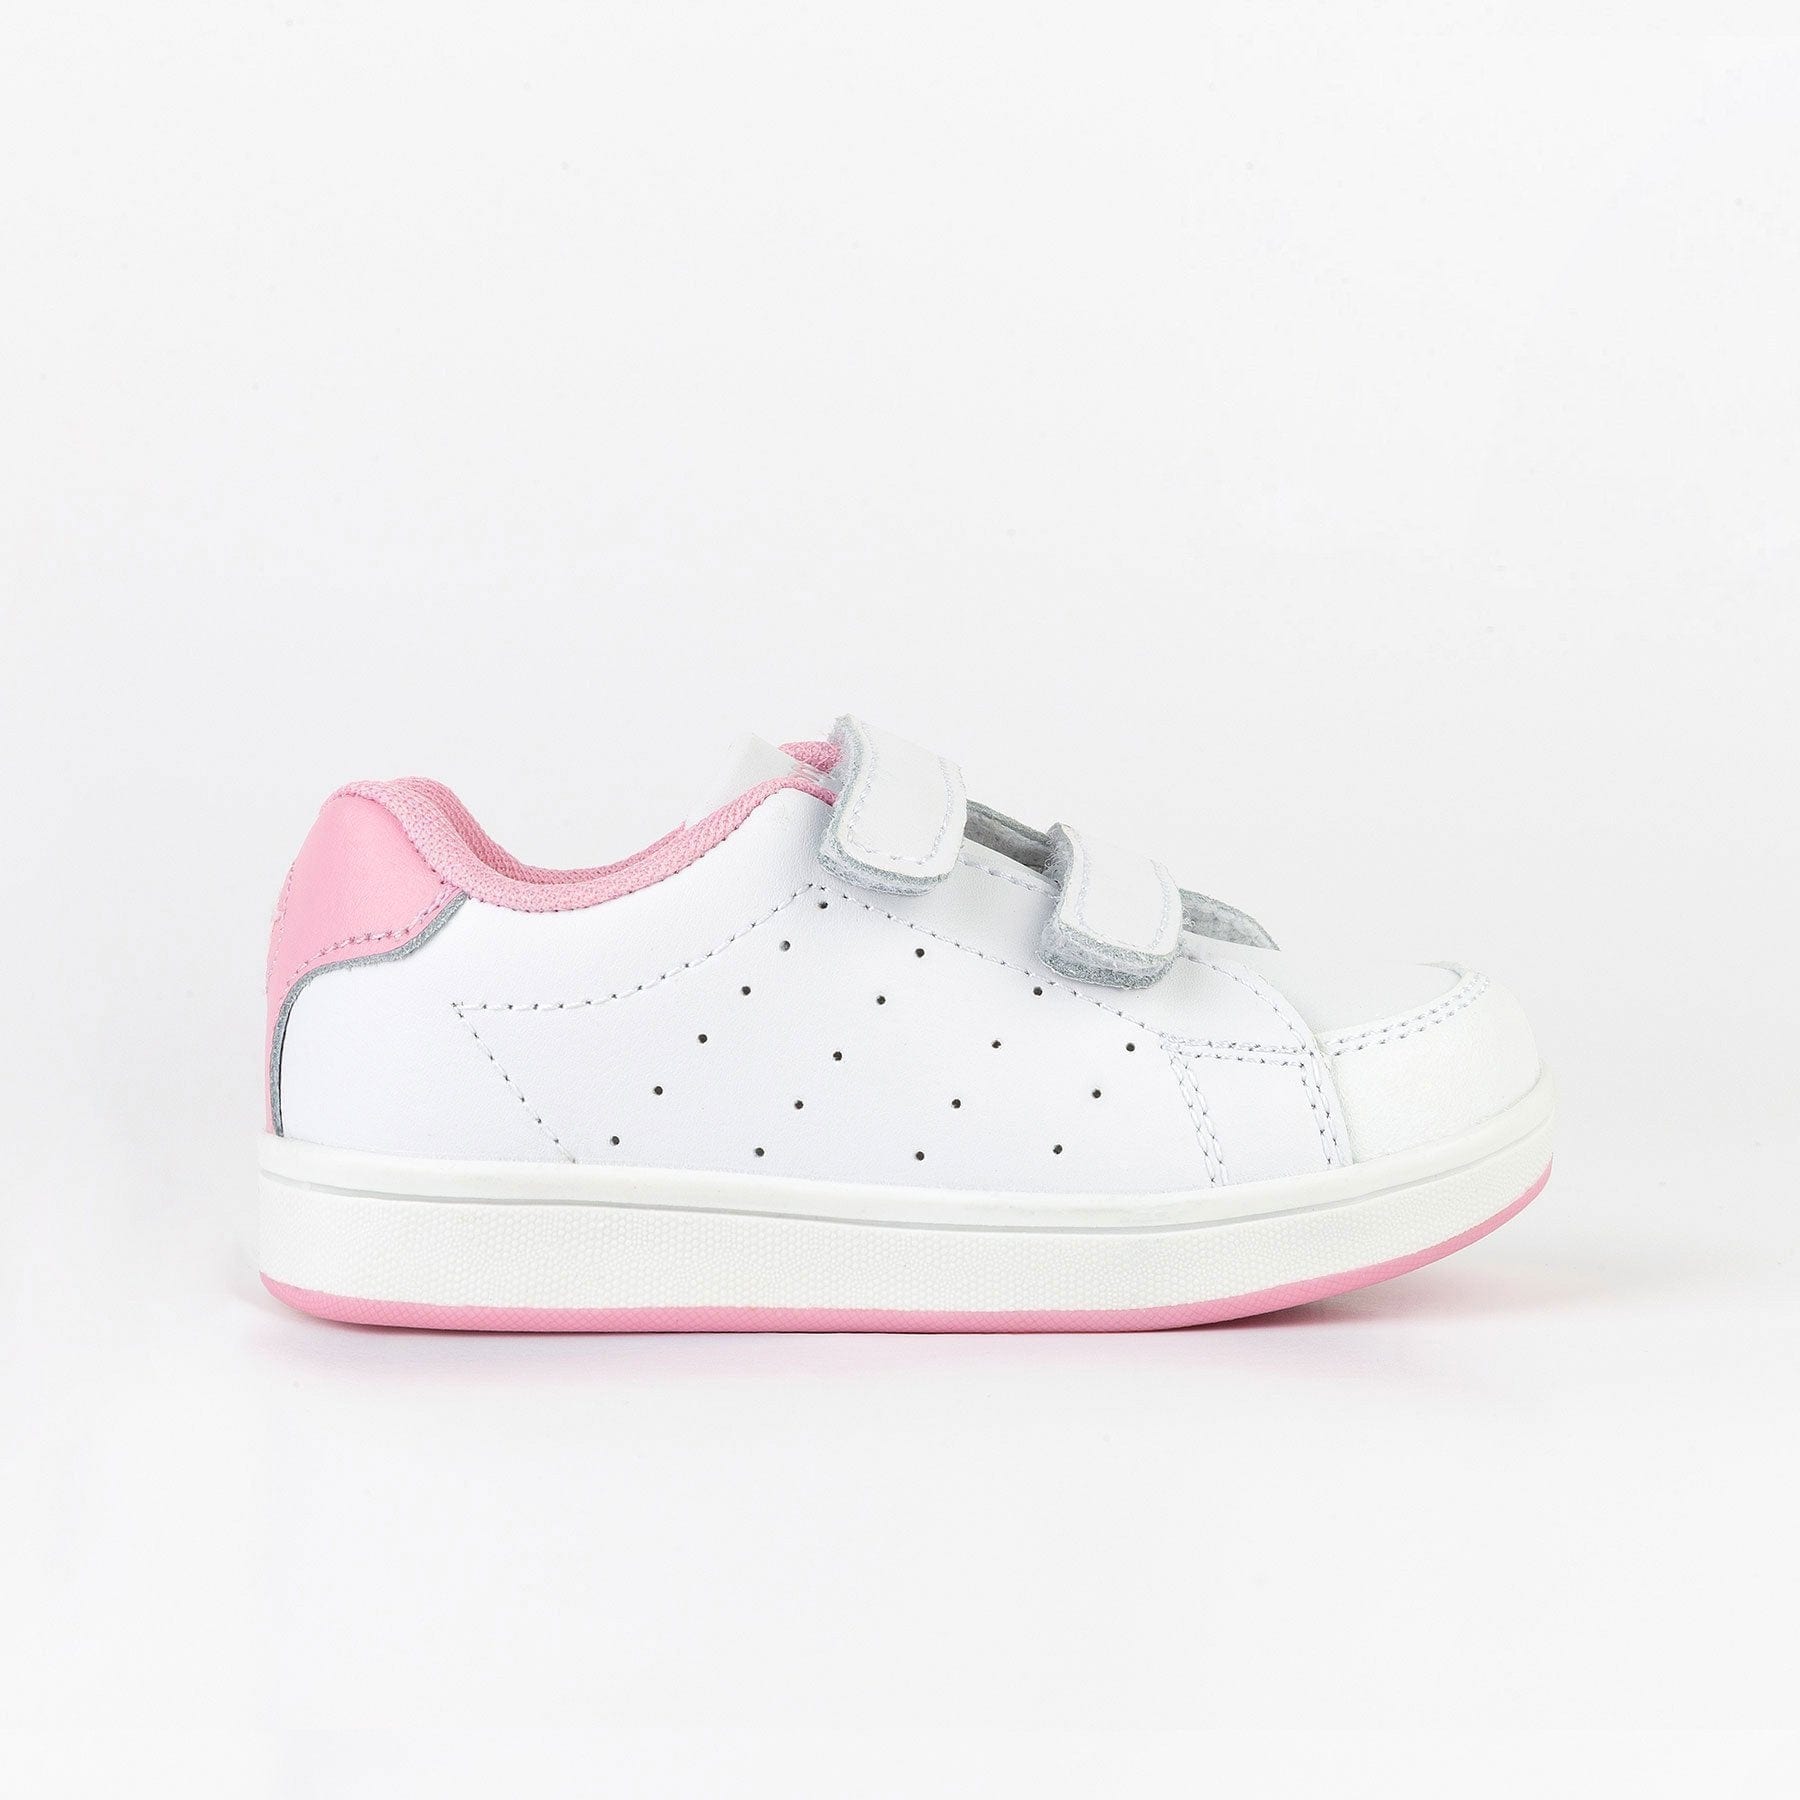 CONGUITOS Shoes Unisex Pink Washable Leather Trainers